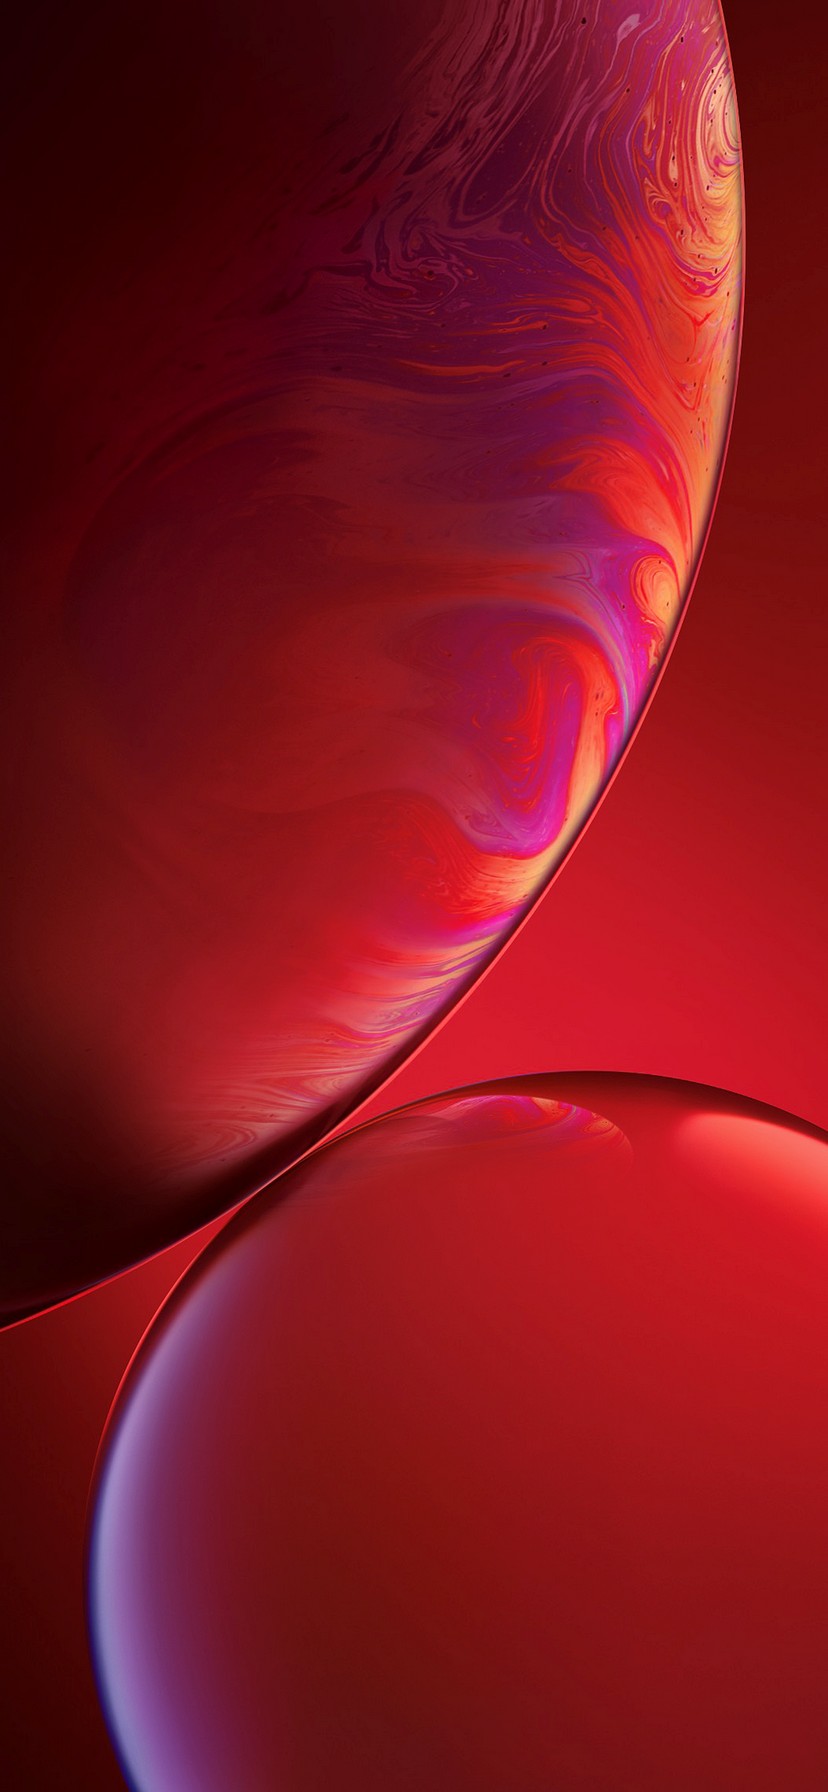 iPhone XR Wallpaper HD With high-resolution 828X1792 pixel. You can set as wallpaper for Apple iPhone X, XS Max, XR, 8, 7, 6, SE, iPad. Enjoy and share your favorite HD wallpapers and background images